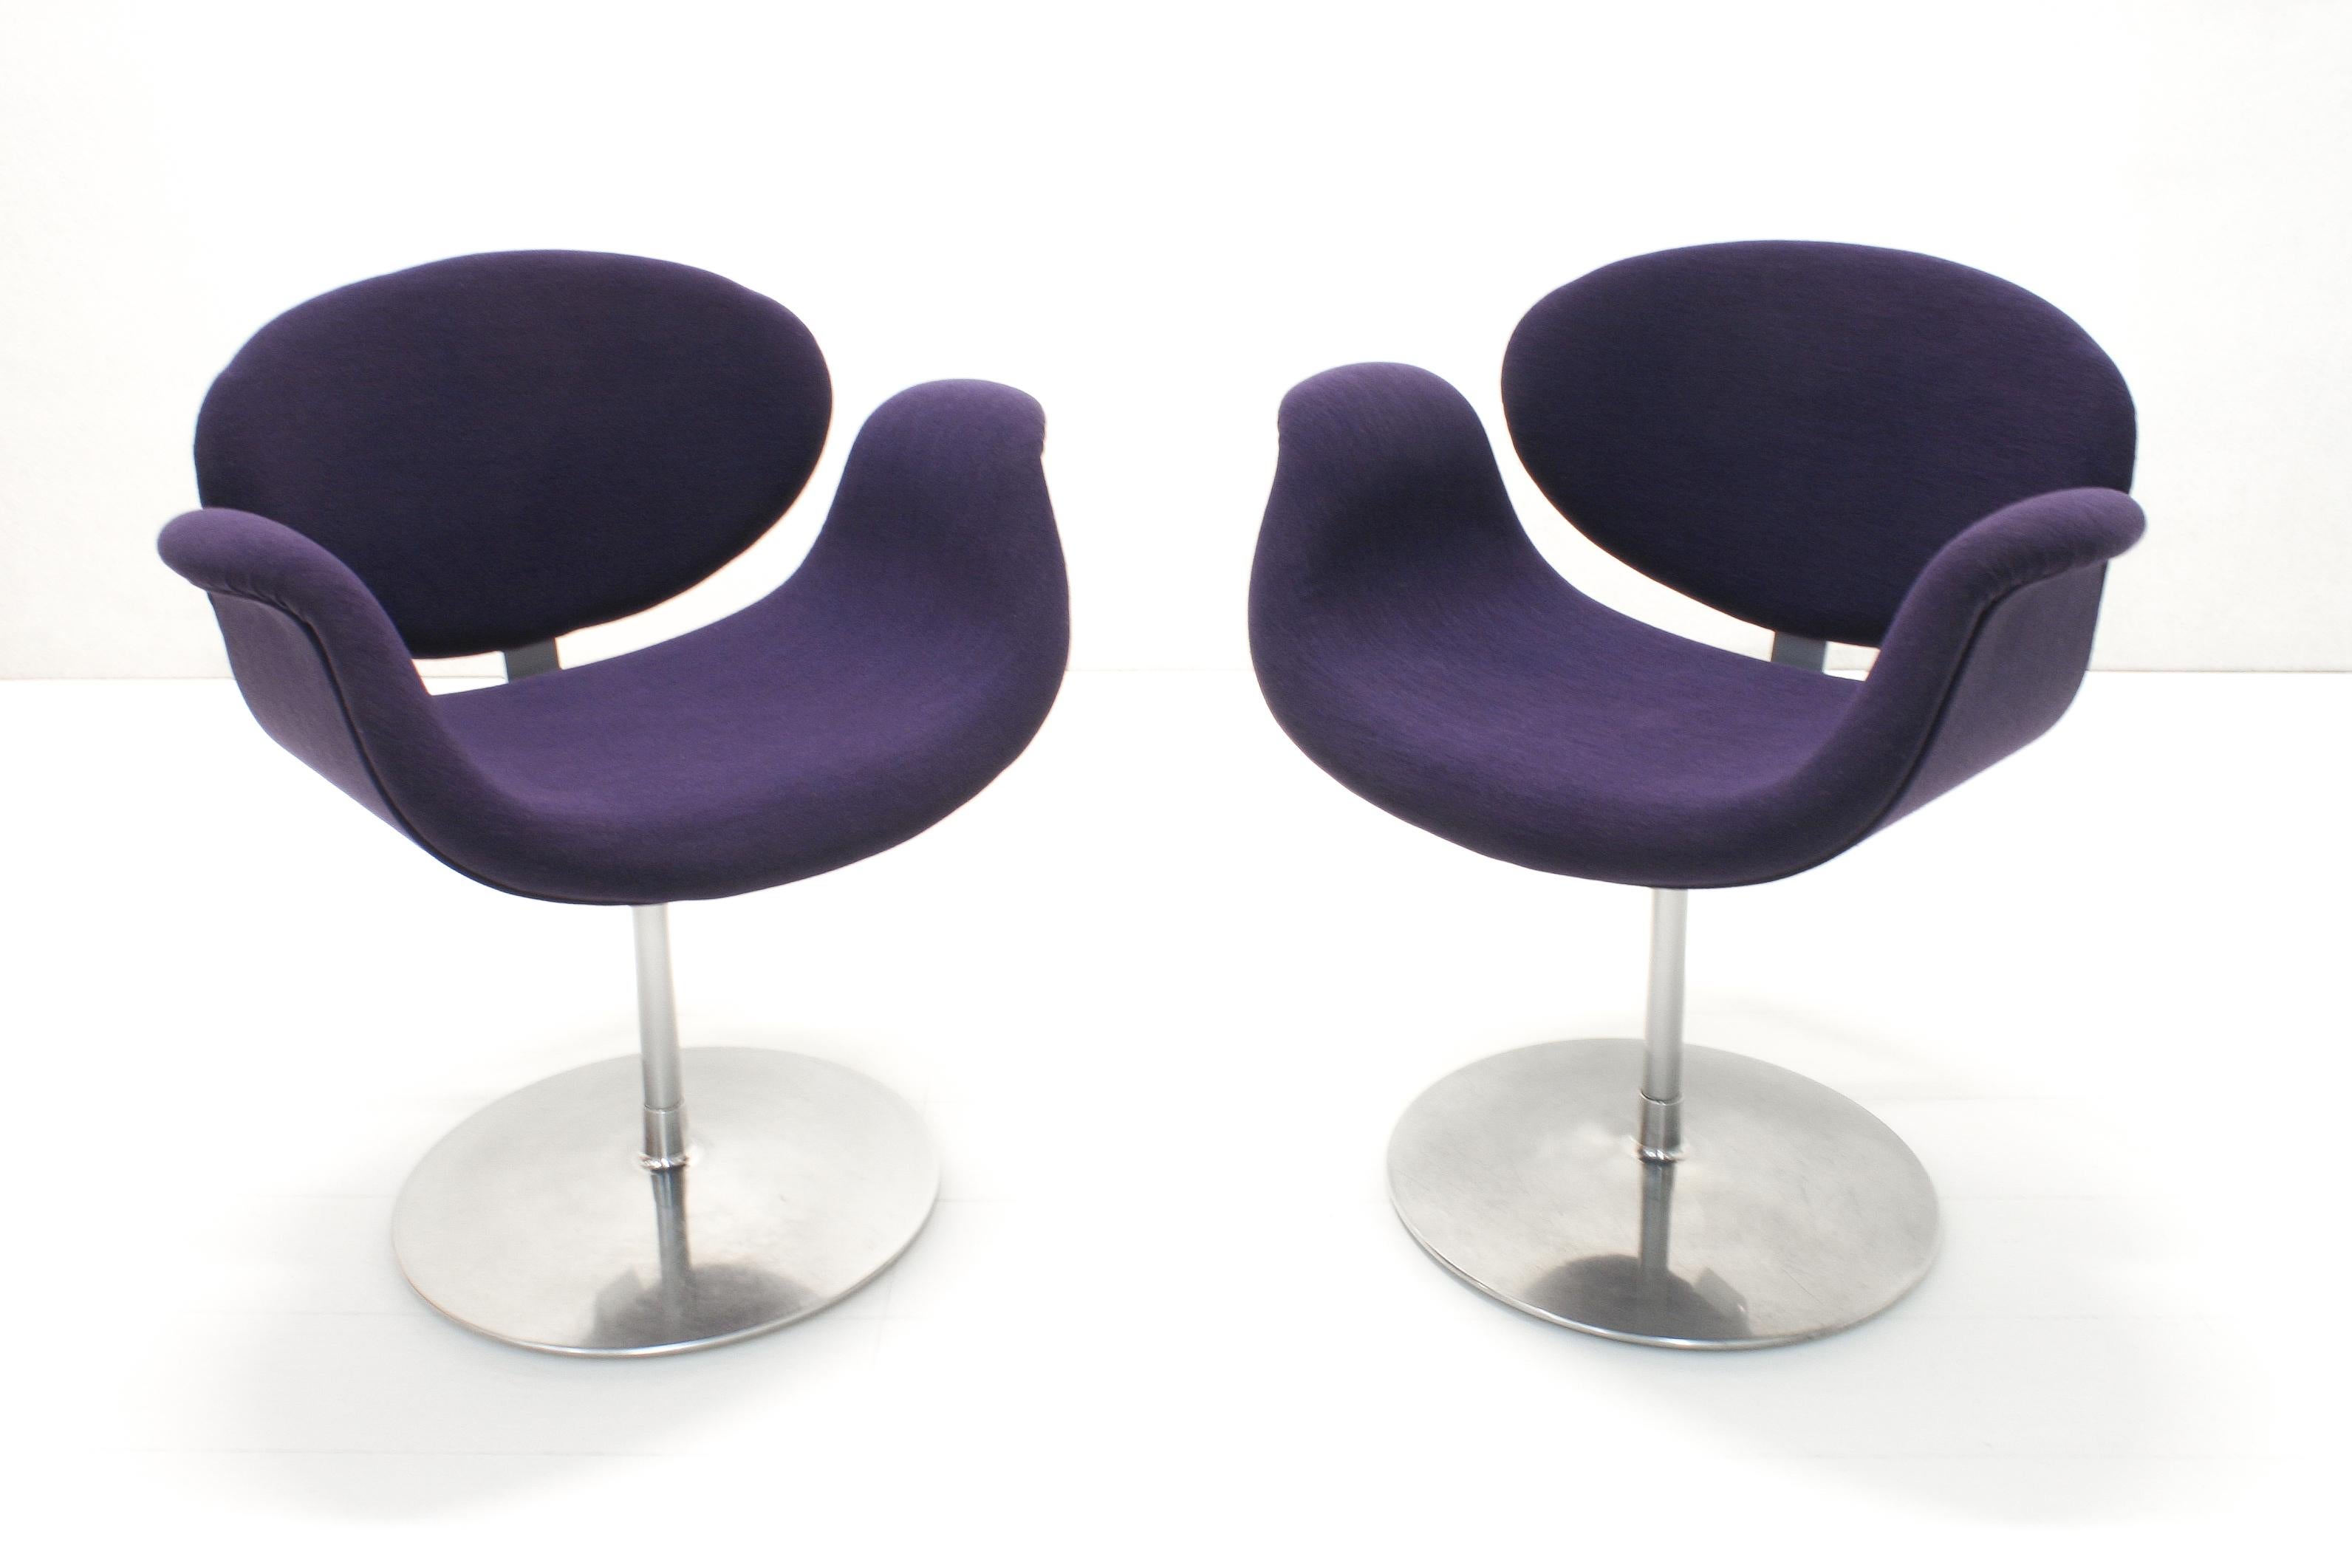 Set of six purple Little Tulip swivel chairs on aluminum tulip pedestal feet.
Inspired by the flower, the chair has a tulip-esque silhouette with a petal-shaped seat which curves out to create armrests.

Still in a good condition.
Some scratches and